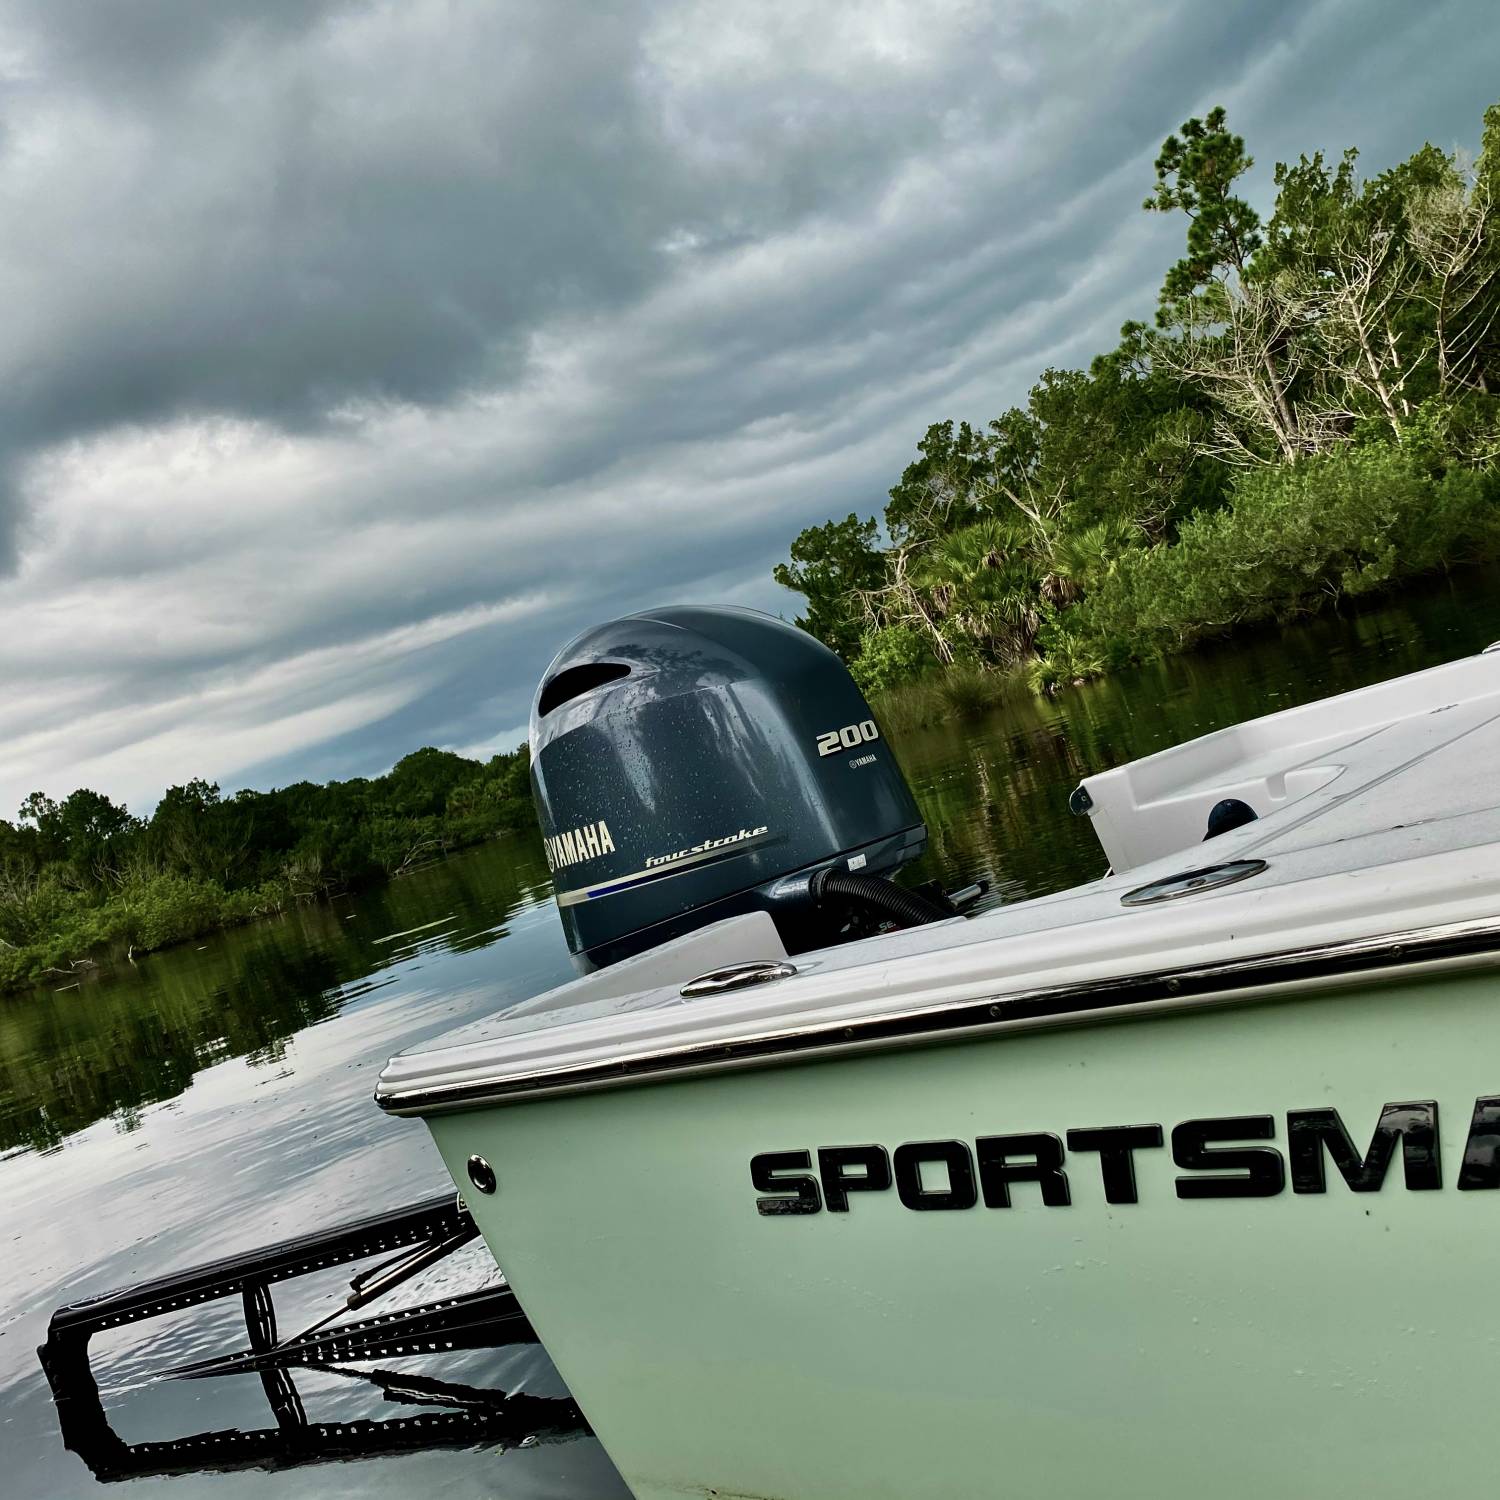 Title: beating the storm - On board their Sportsman Masters 227 Bay Boat - Location: ormond beach. Participating in the Photo Contest #SportsmanAugust2021